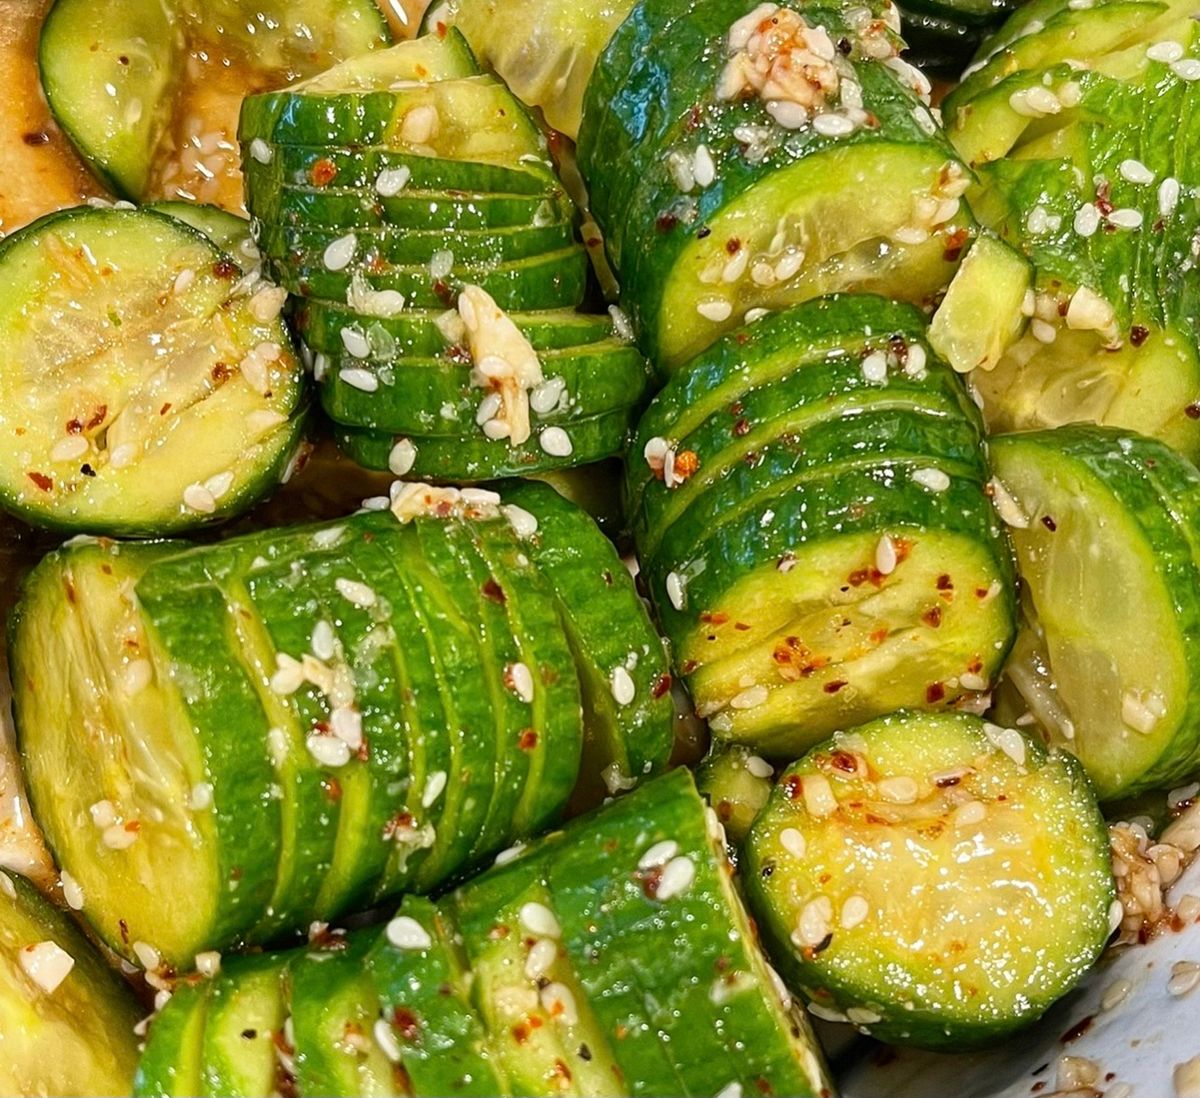 Persian cucumbers in vinegar with red chili flakes